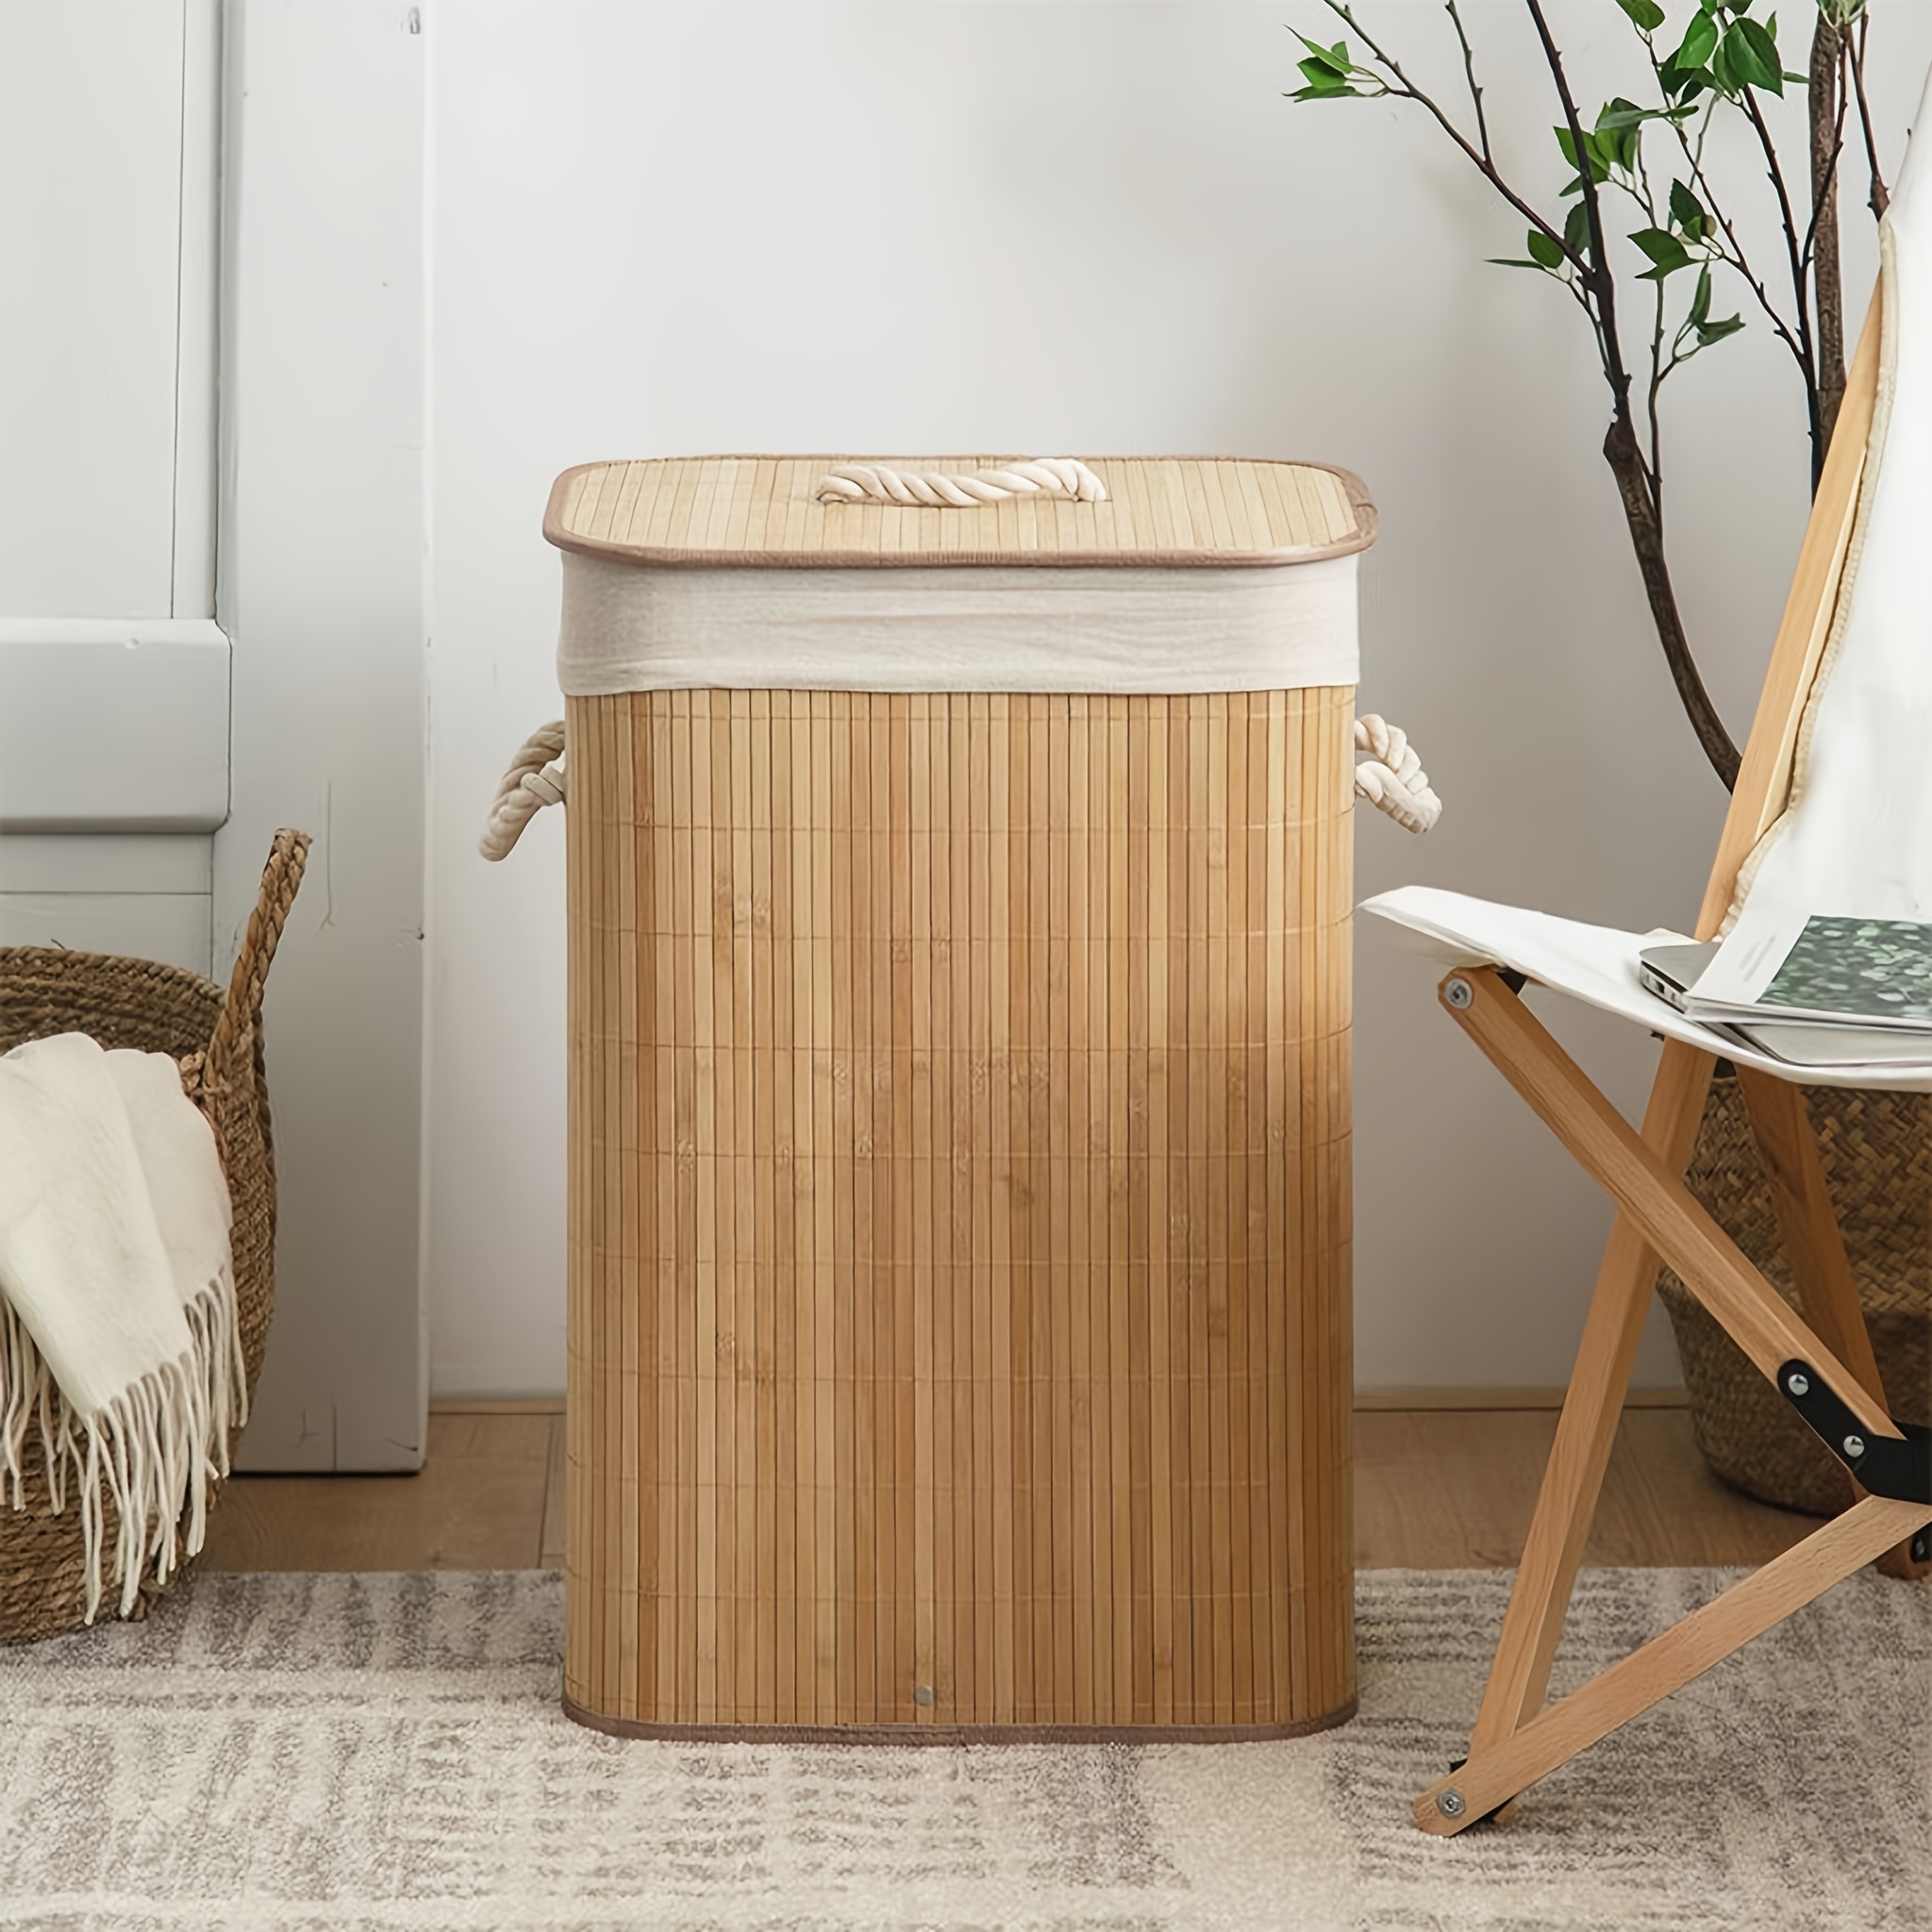 

1pc Foldable Bamboo Laundry Hamper With Lid - Round, Classic Style Storage Basket For Dirty Clothes In Home & Bathroom Laundry Basket Laundry Room Accessories